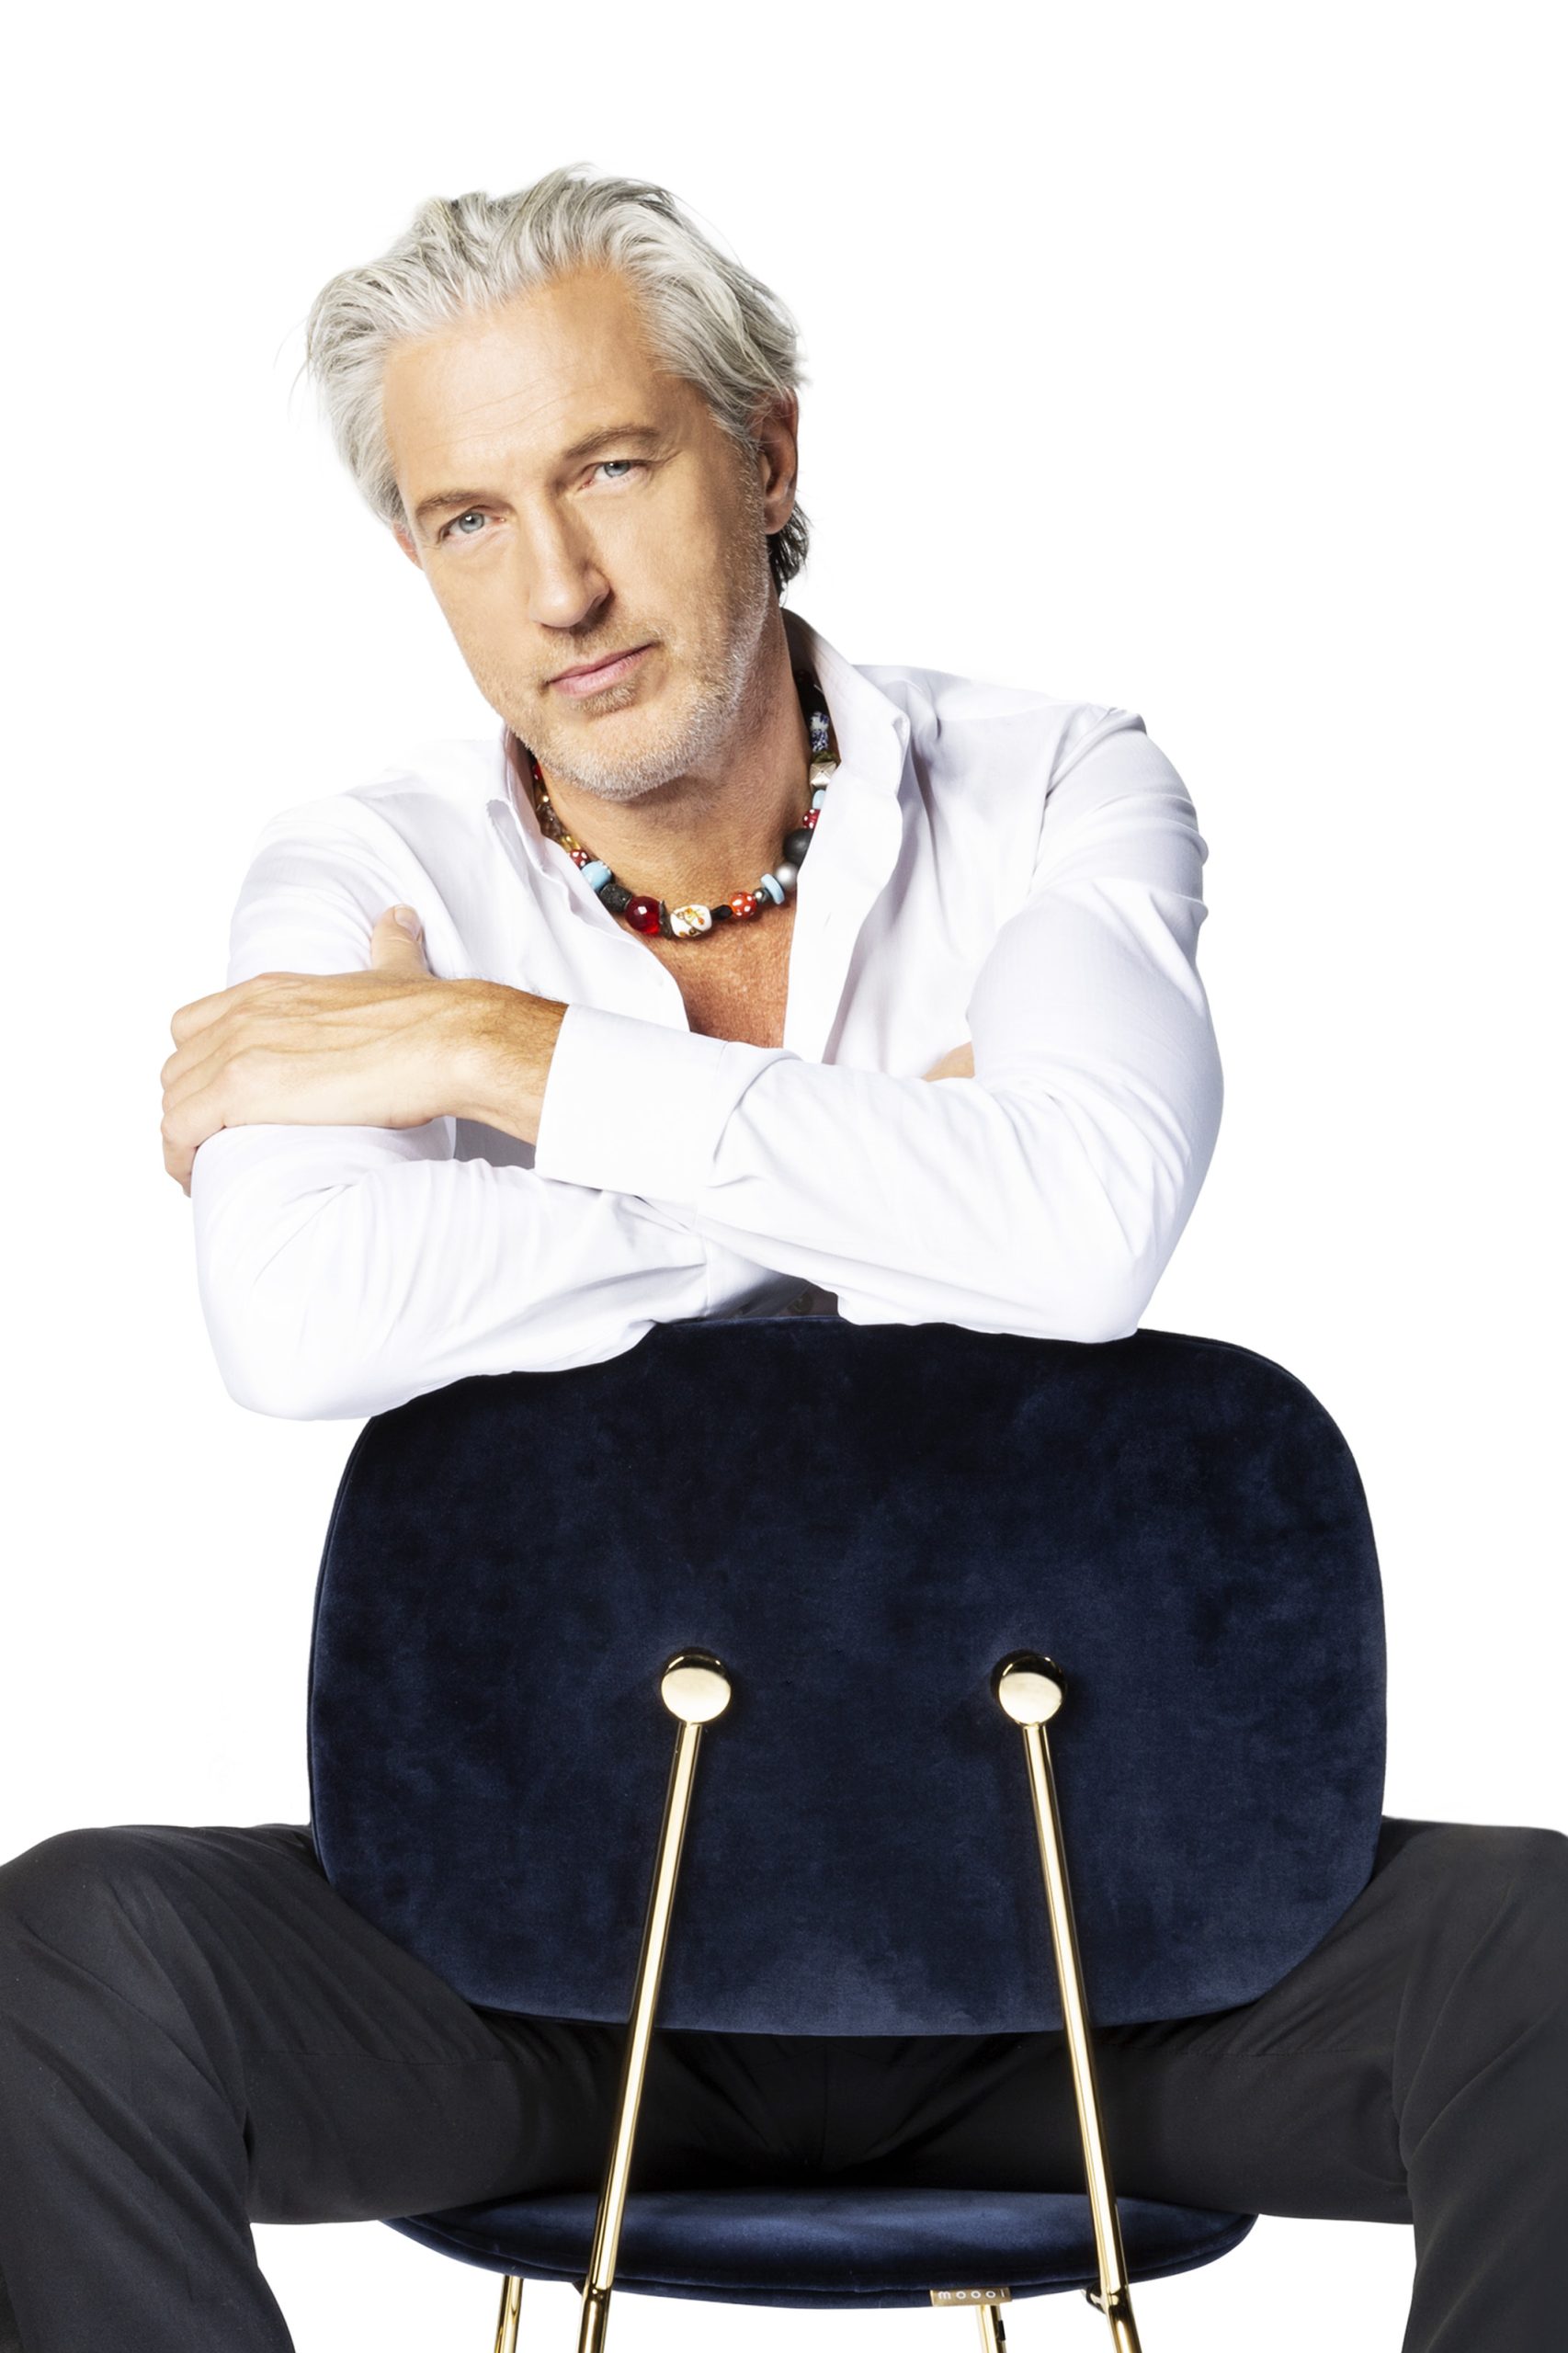 Marcel Wanders on Drawing in His Head, Creating an Environment of